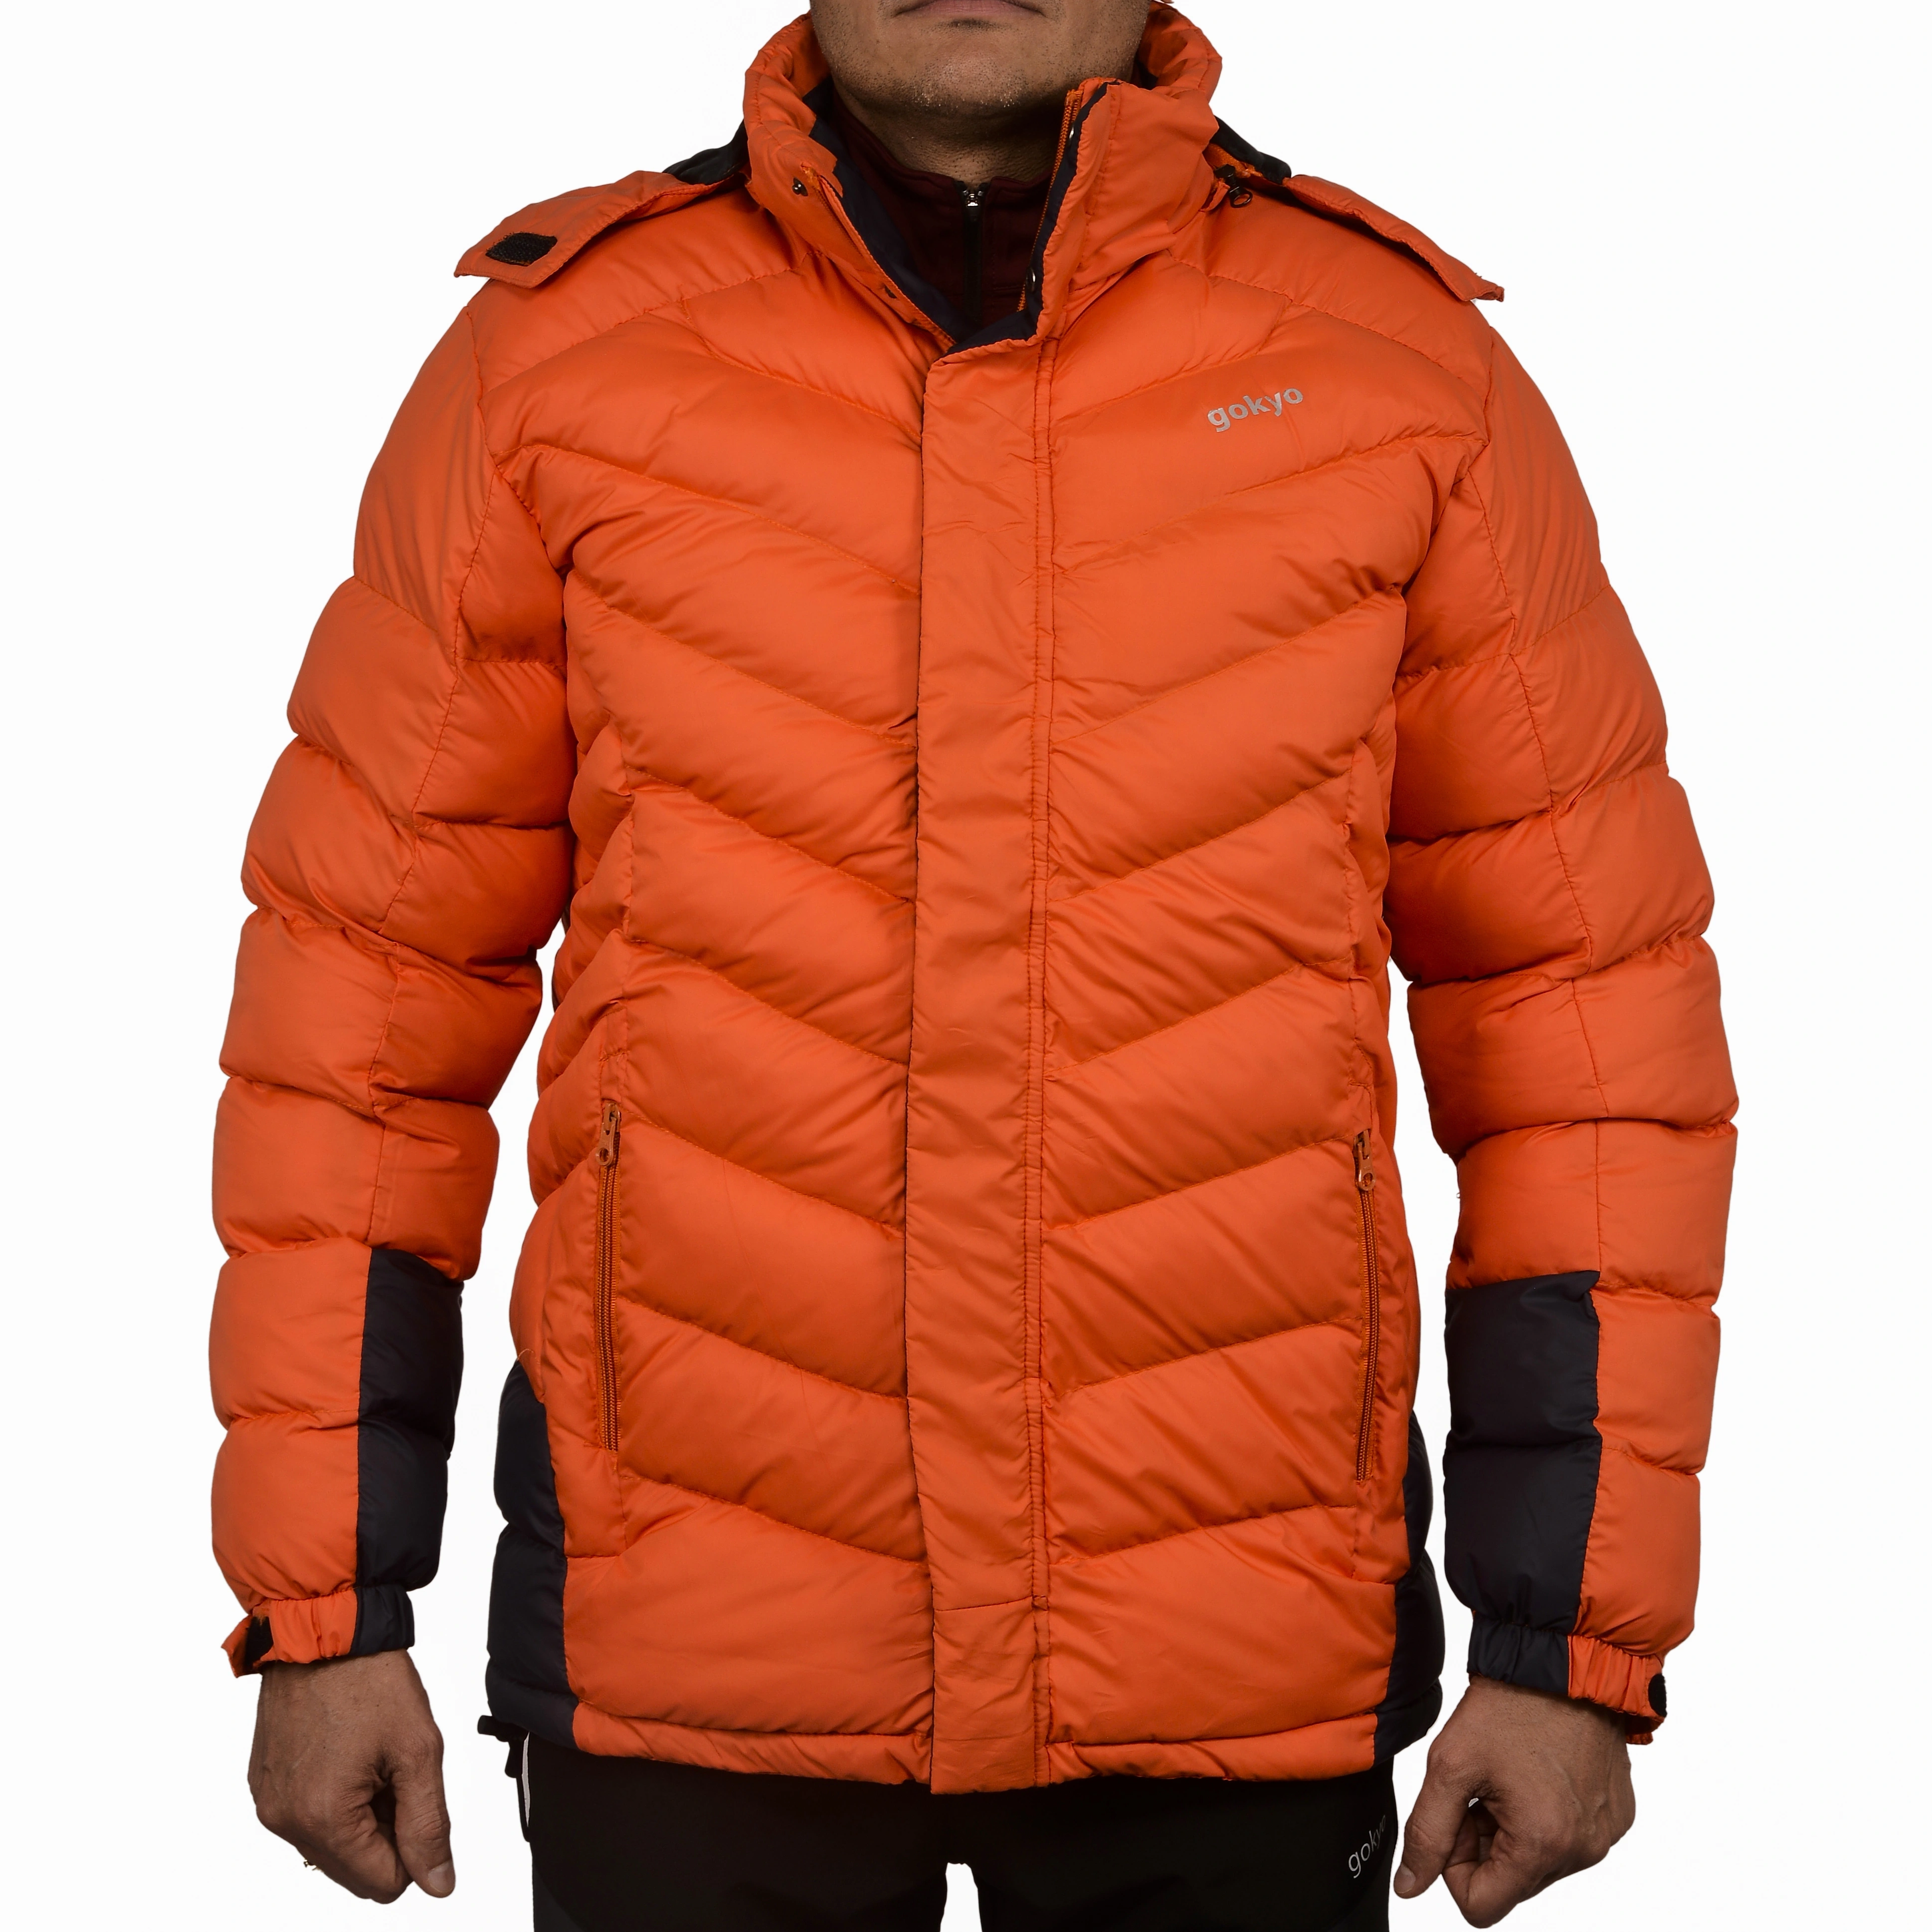 K2 Survivor Down Jacket for Men: Stylized Functionality for Extreme Cold Weather Expeditions (Up to -20°C)-230103